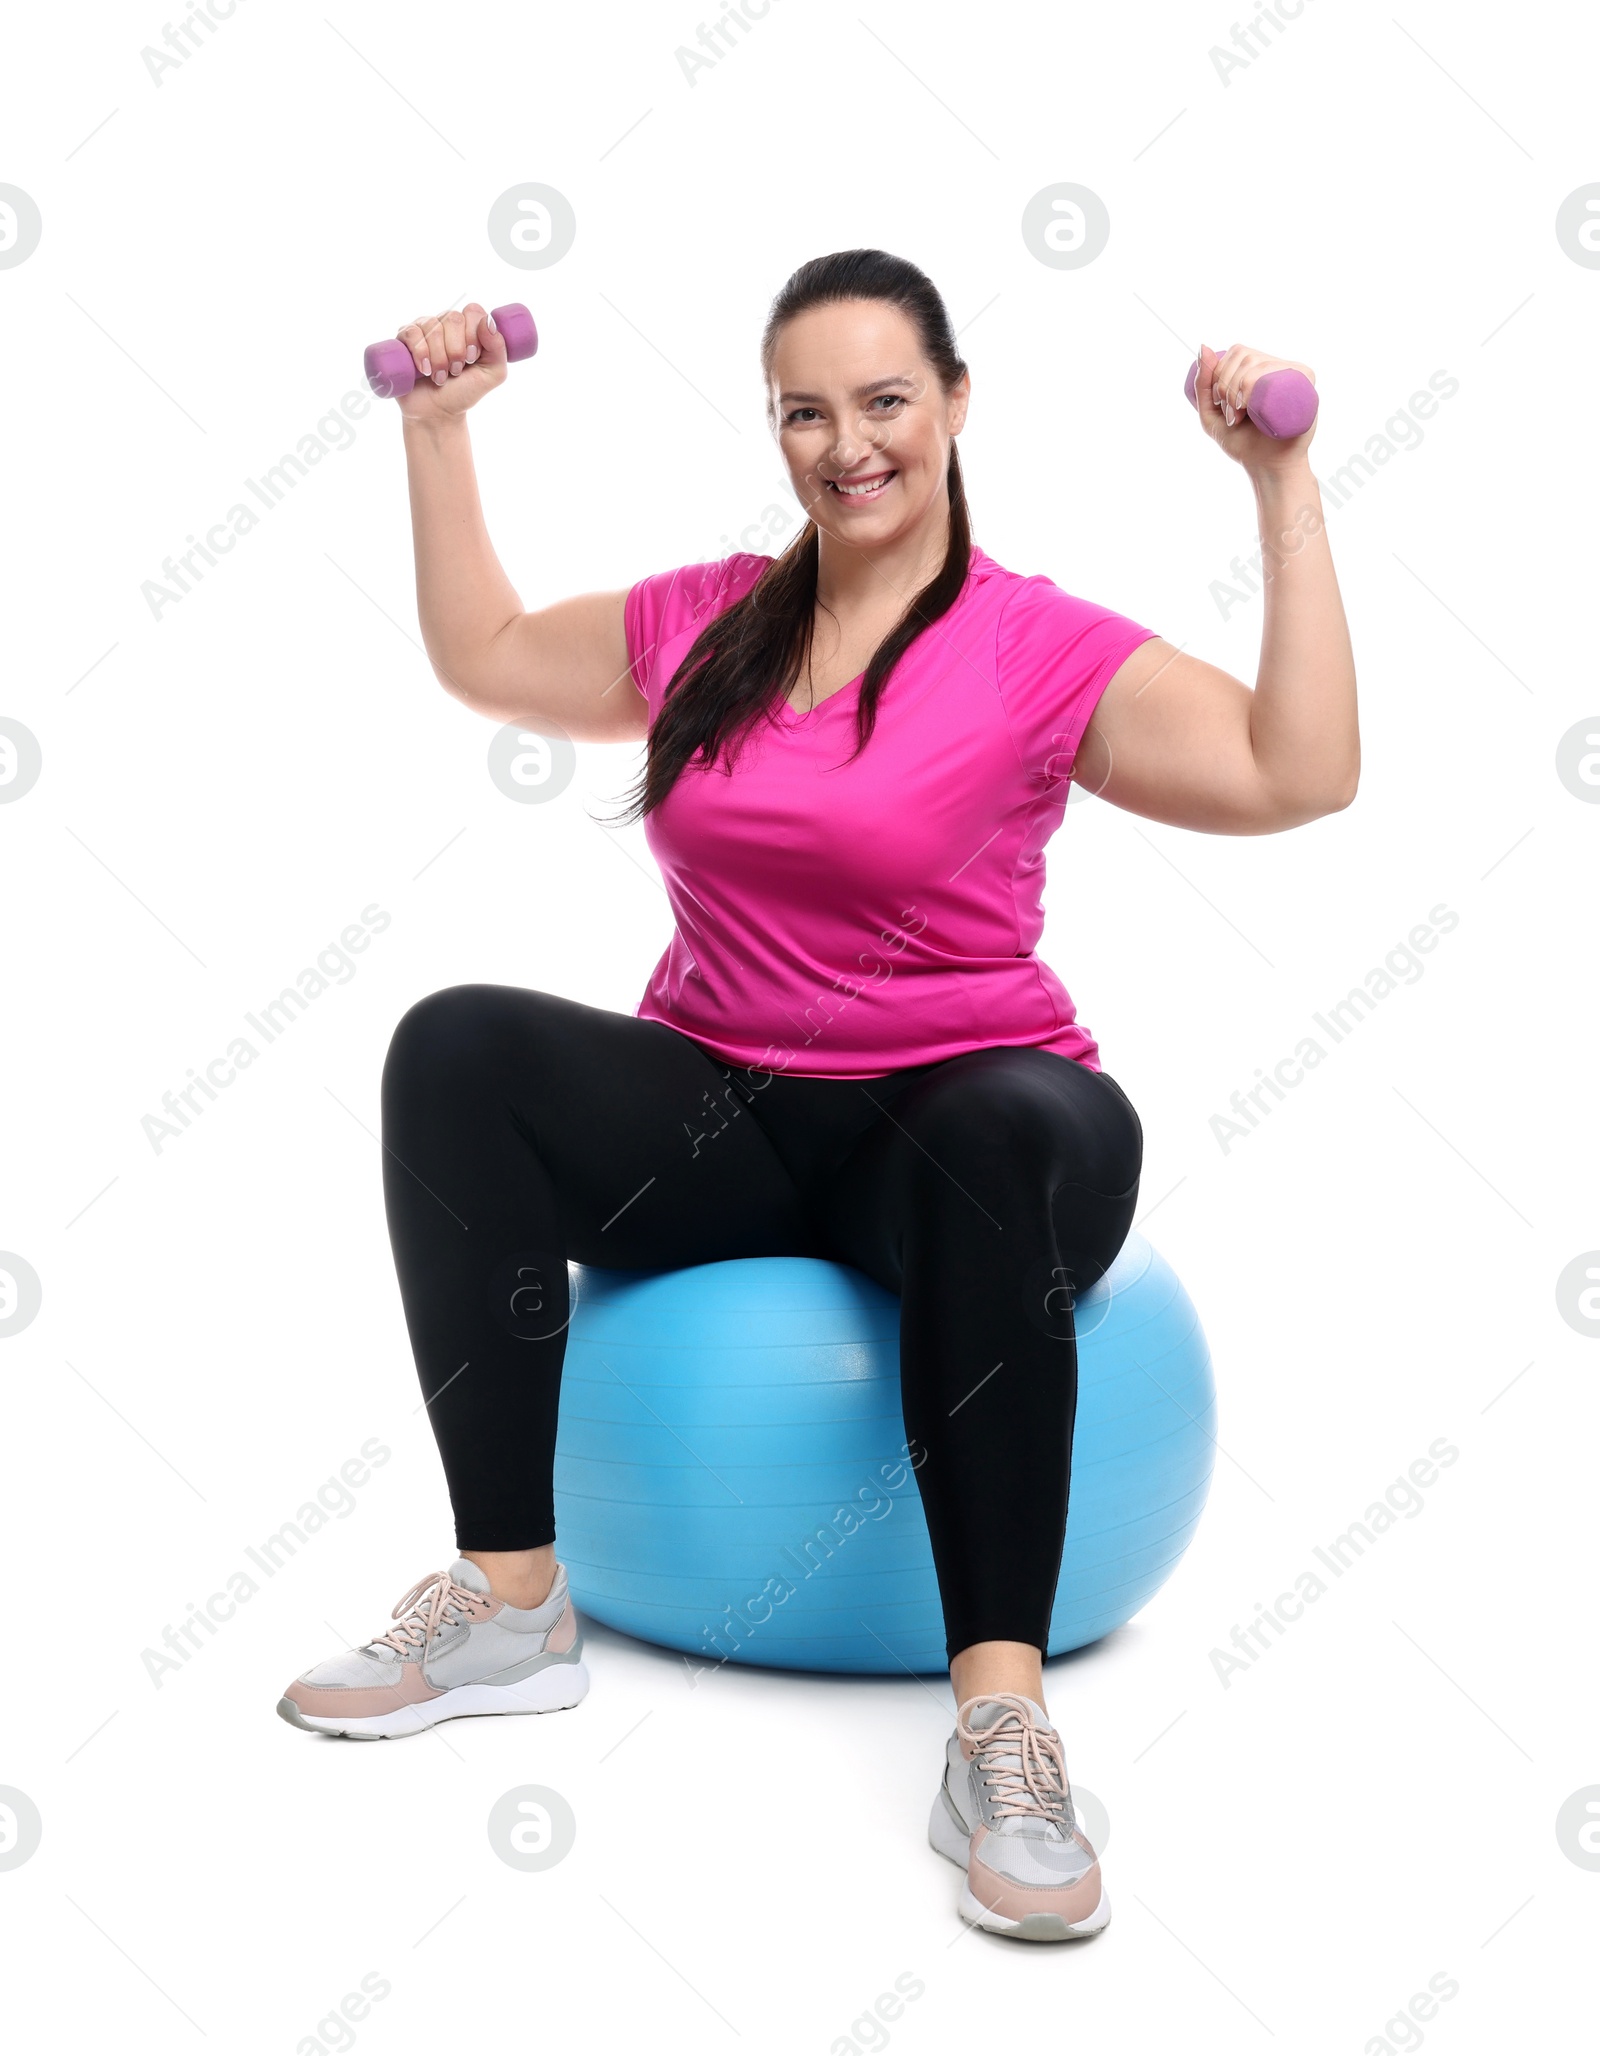 Photo of Happy overweight woman with dumbbells sitting on fitness ball against white background